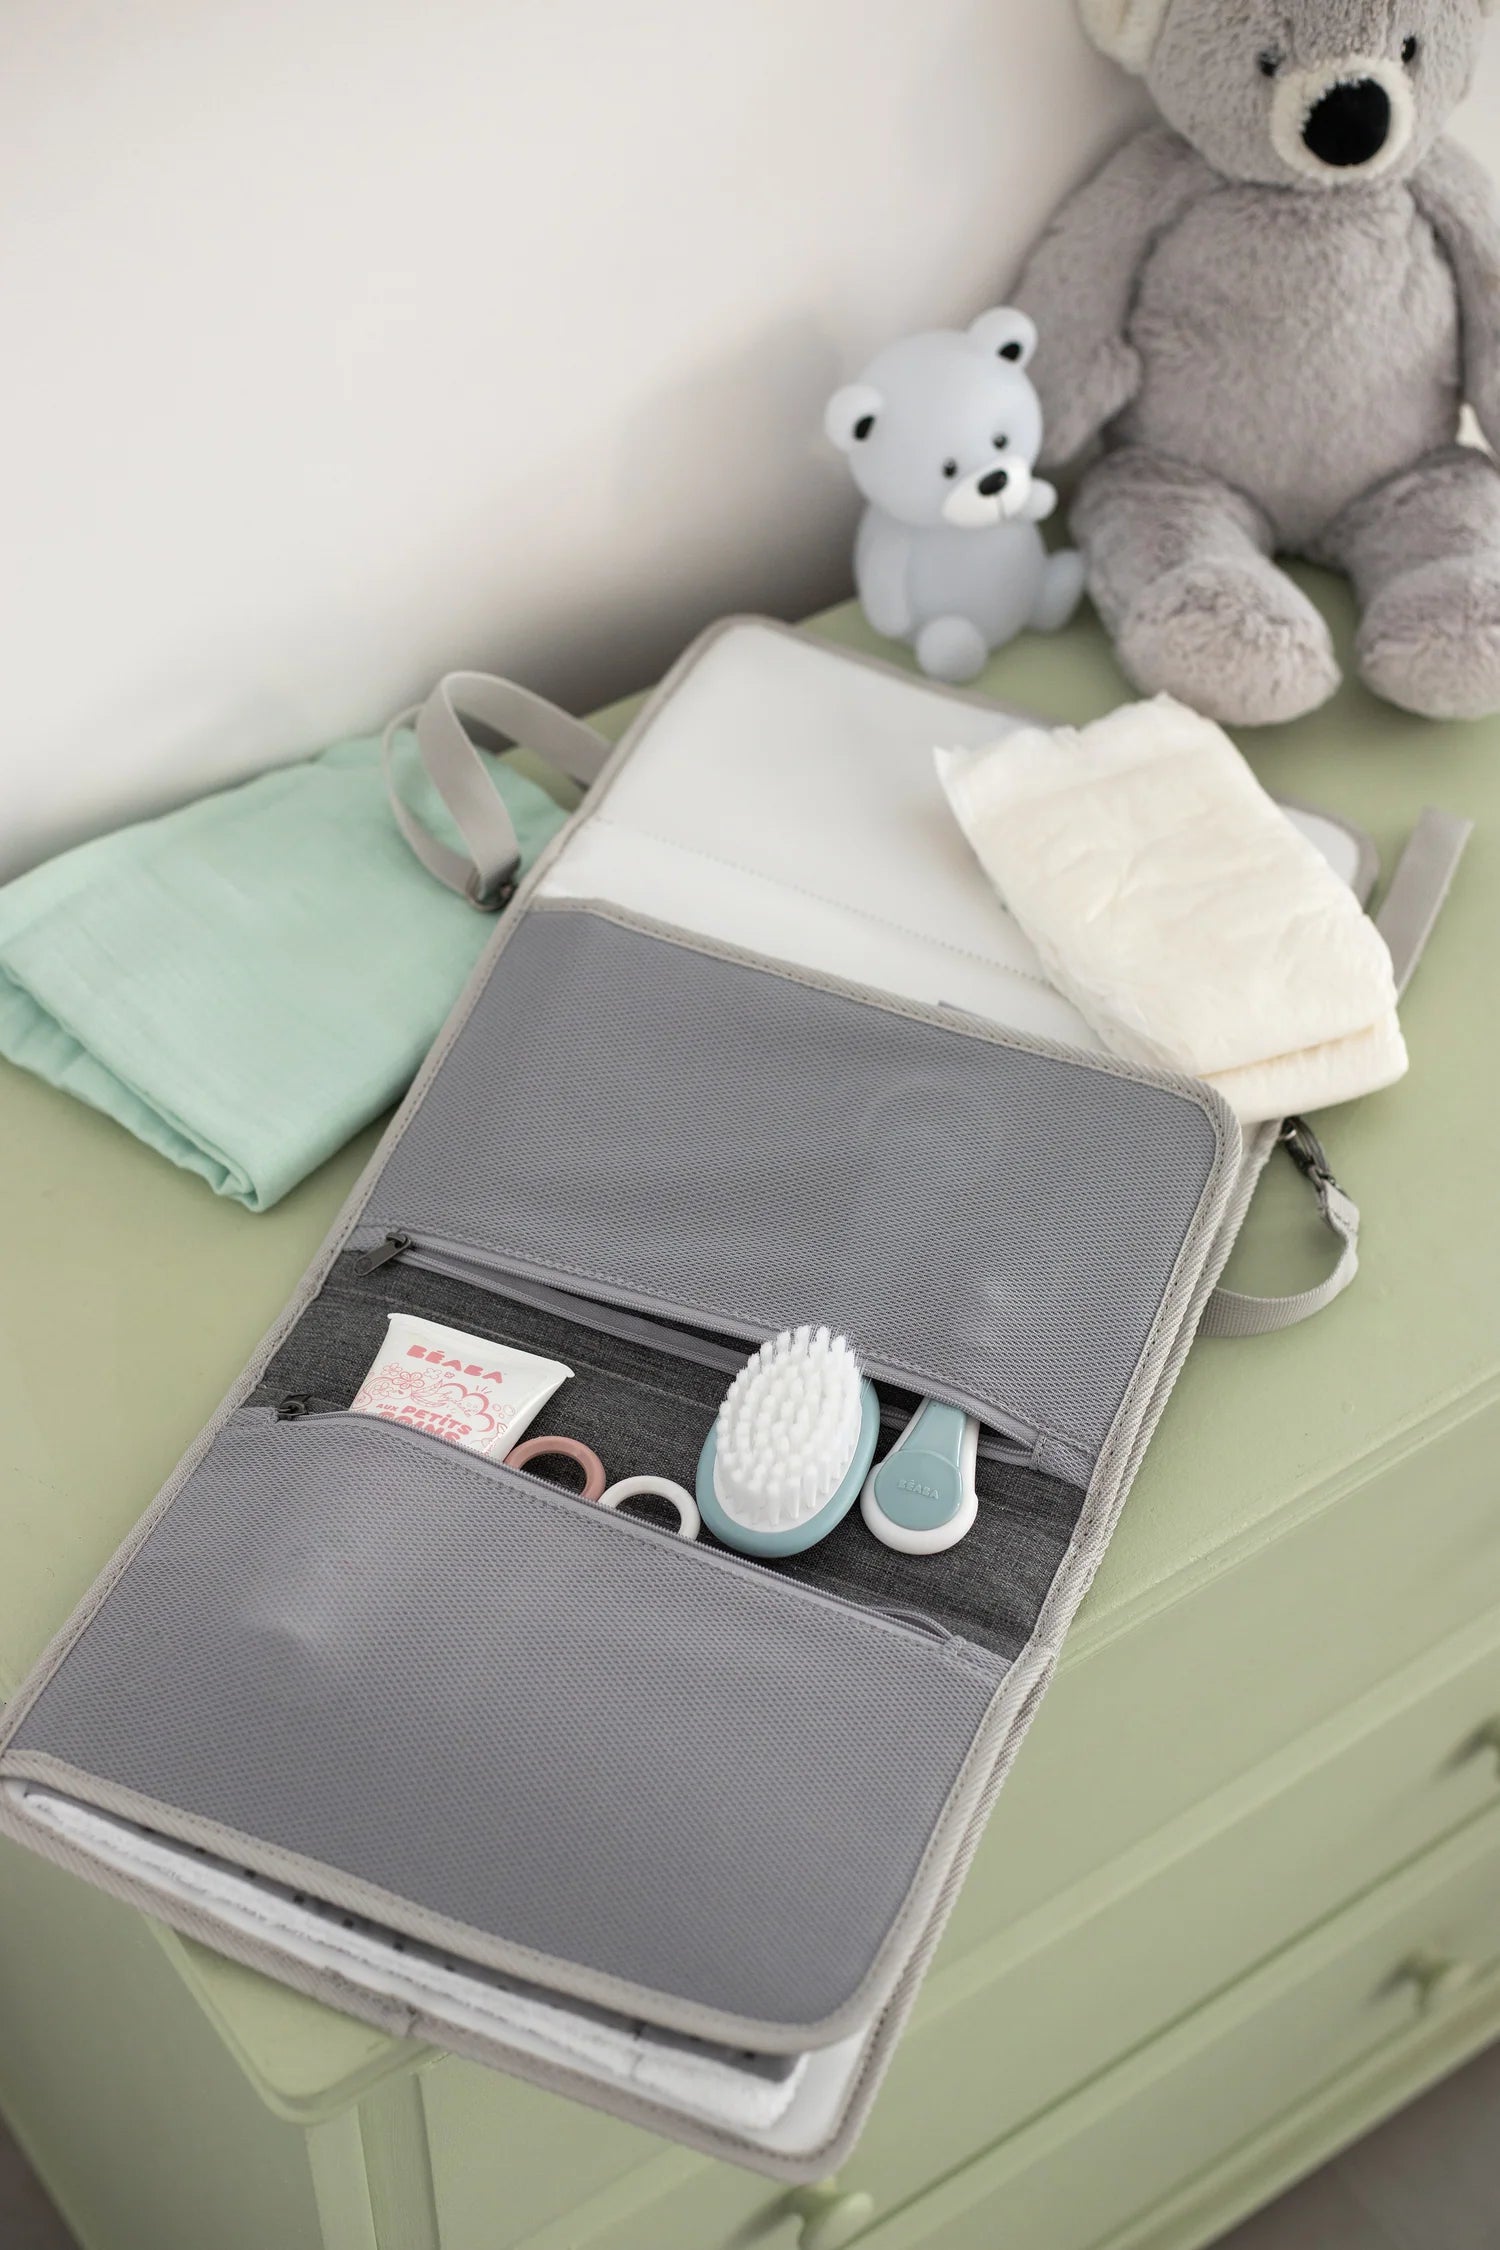 Beaba Changing Pouch - Heather Grey - Tiny Tots Baby Store 